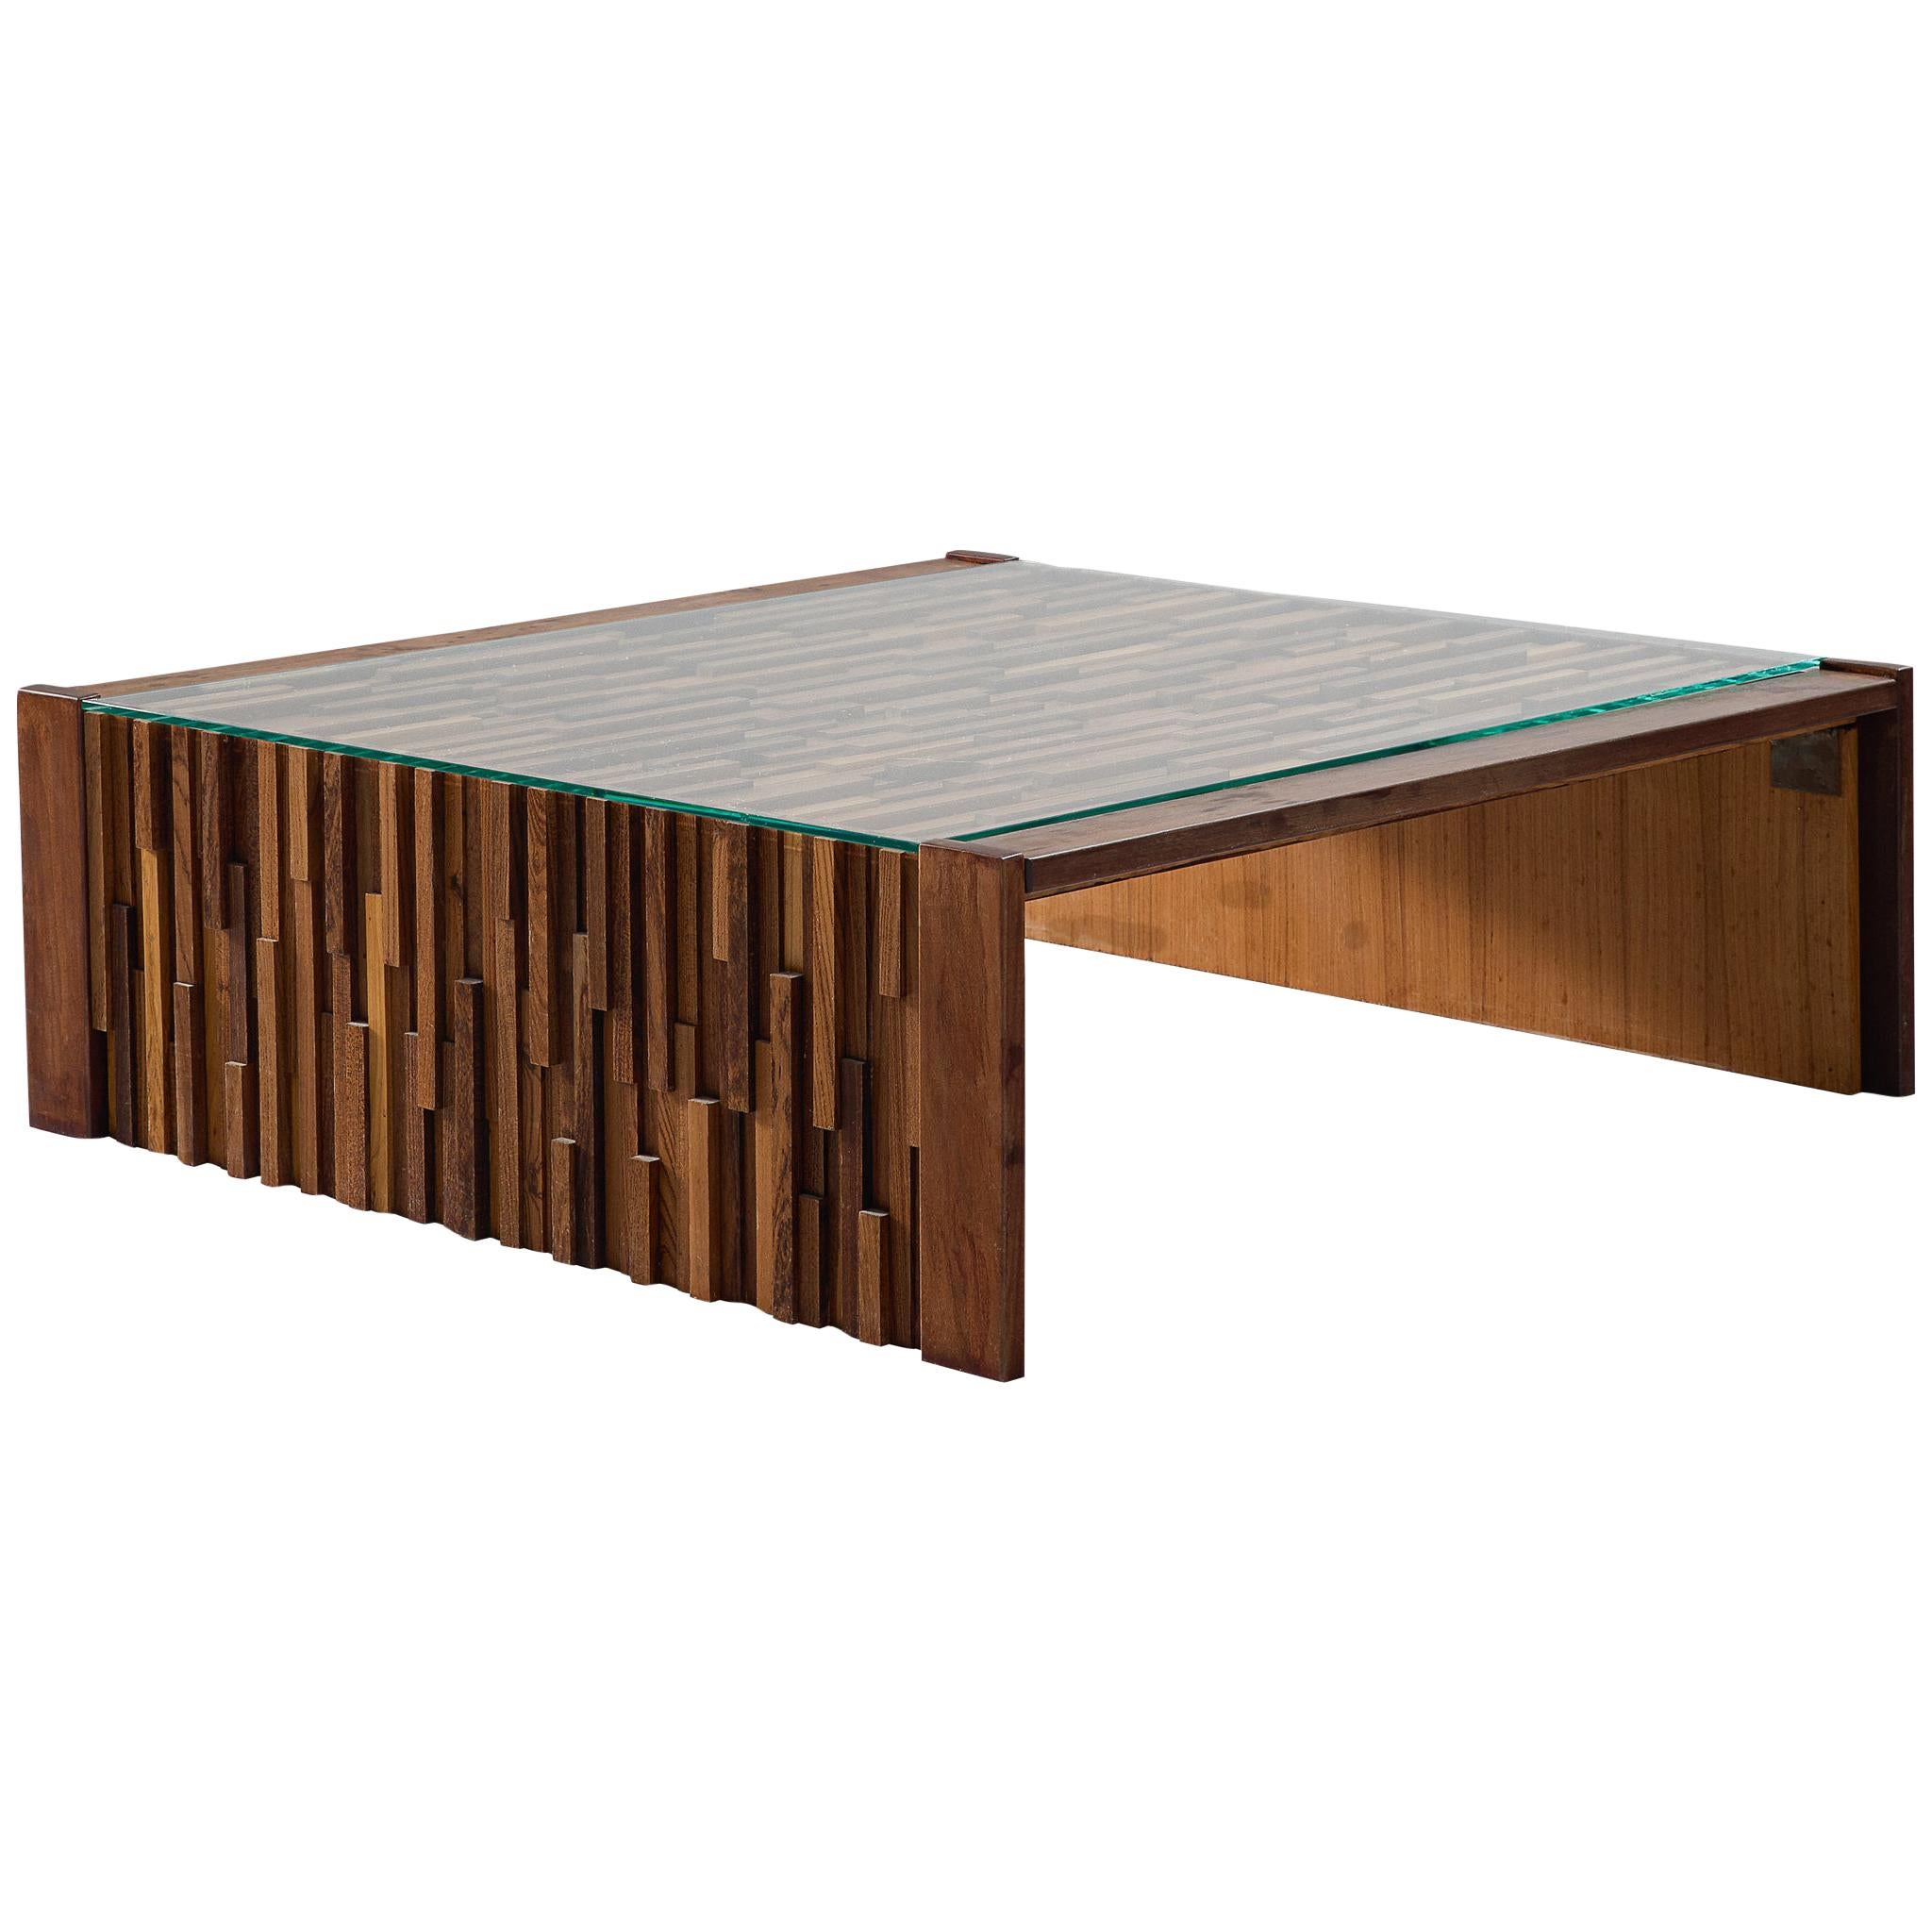 Percival Lafer Large Coffee Table with Mosaic of Solid Wood 